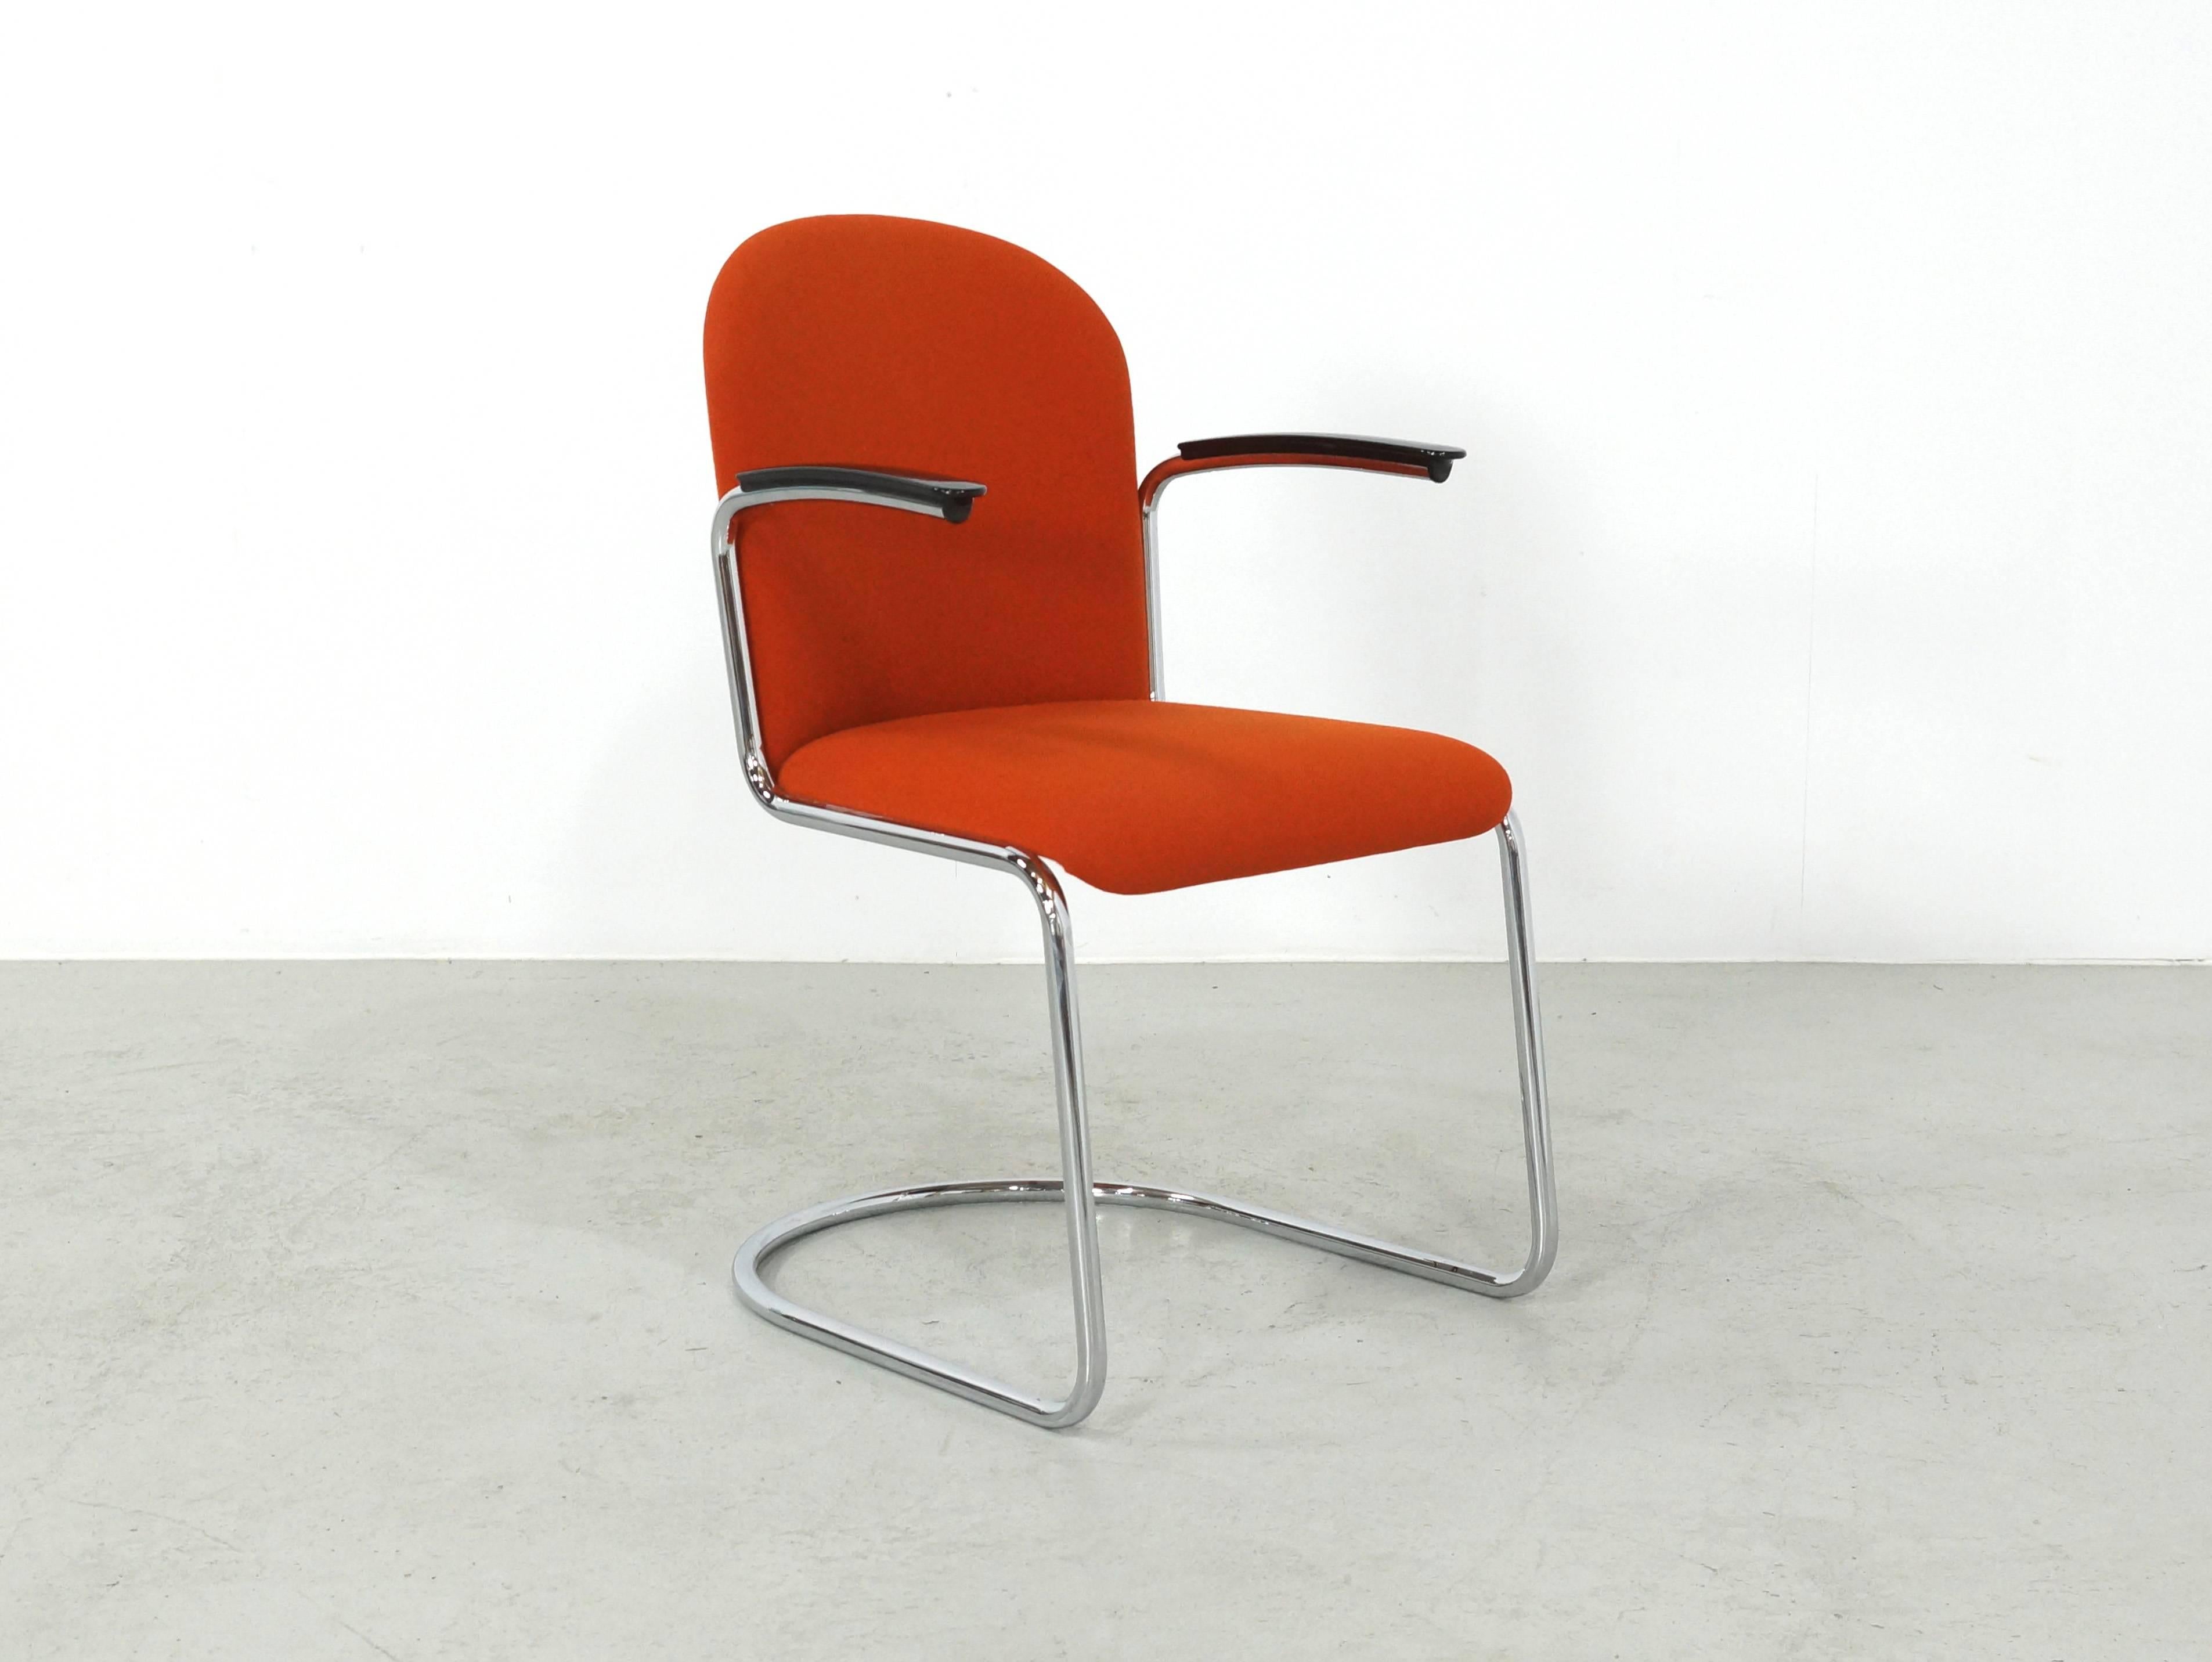 Set of six orange dining or conference chairs model 413 R designed by W.H. Gispen for Dutch Originals. WH Gispen originally designed this model in 1937. These cantilever chairs were extremely modernistic for that time, the success for this model